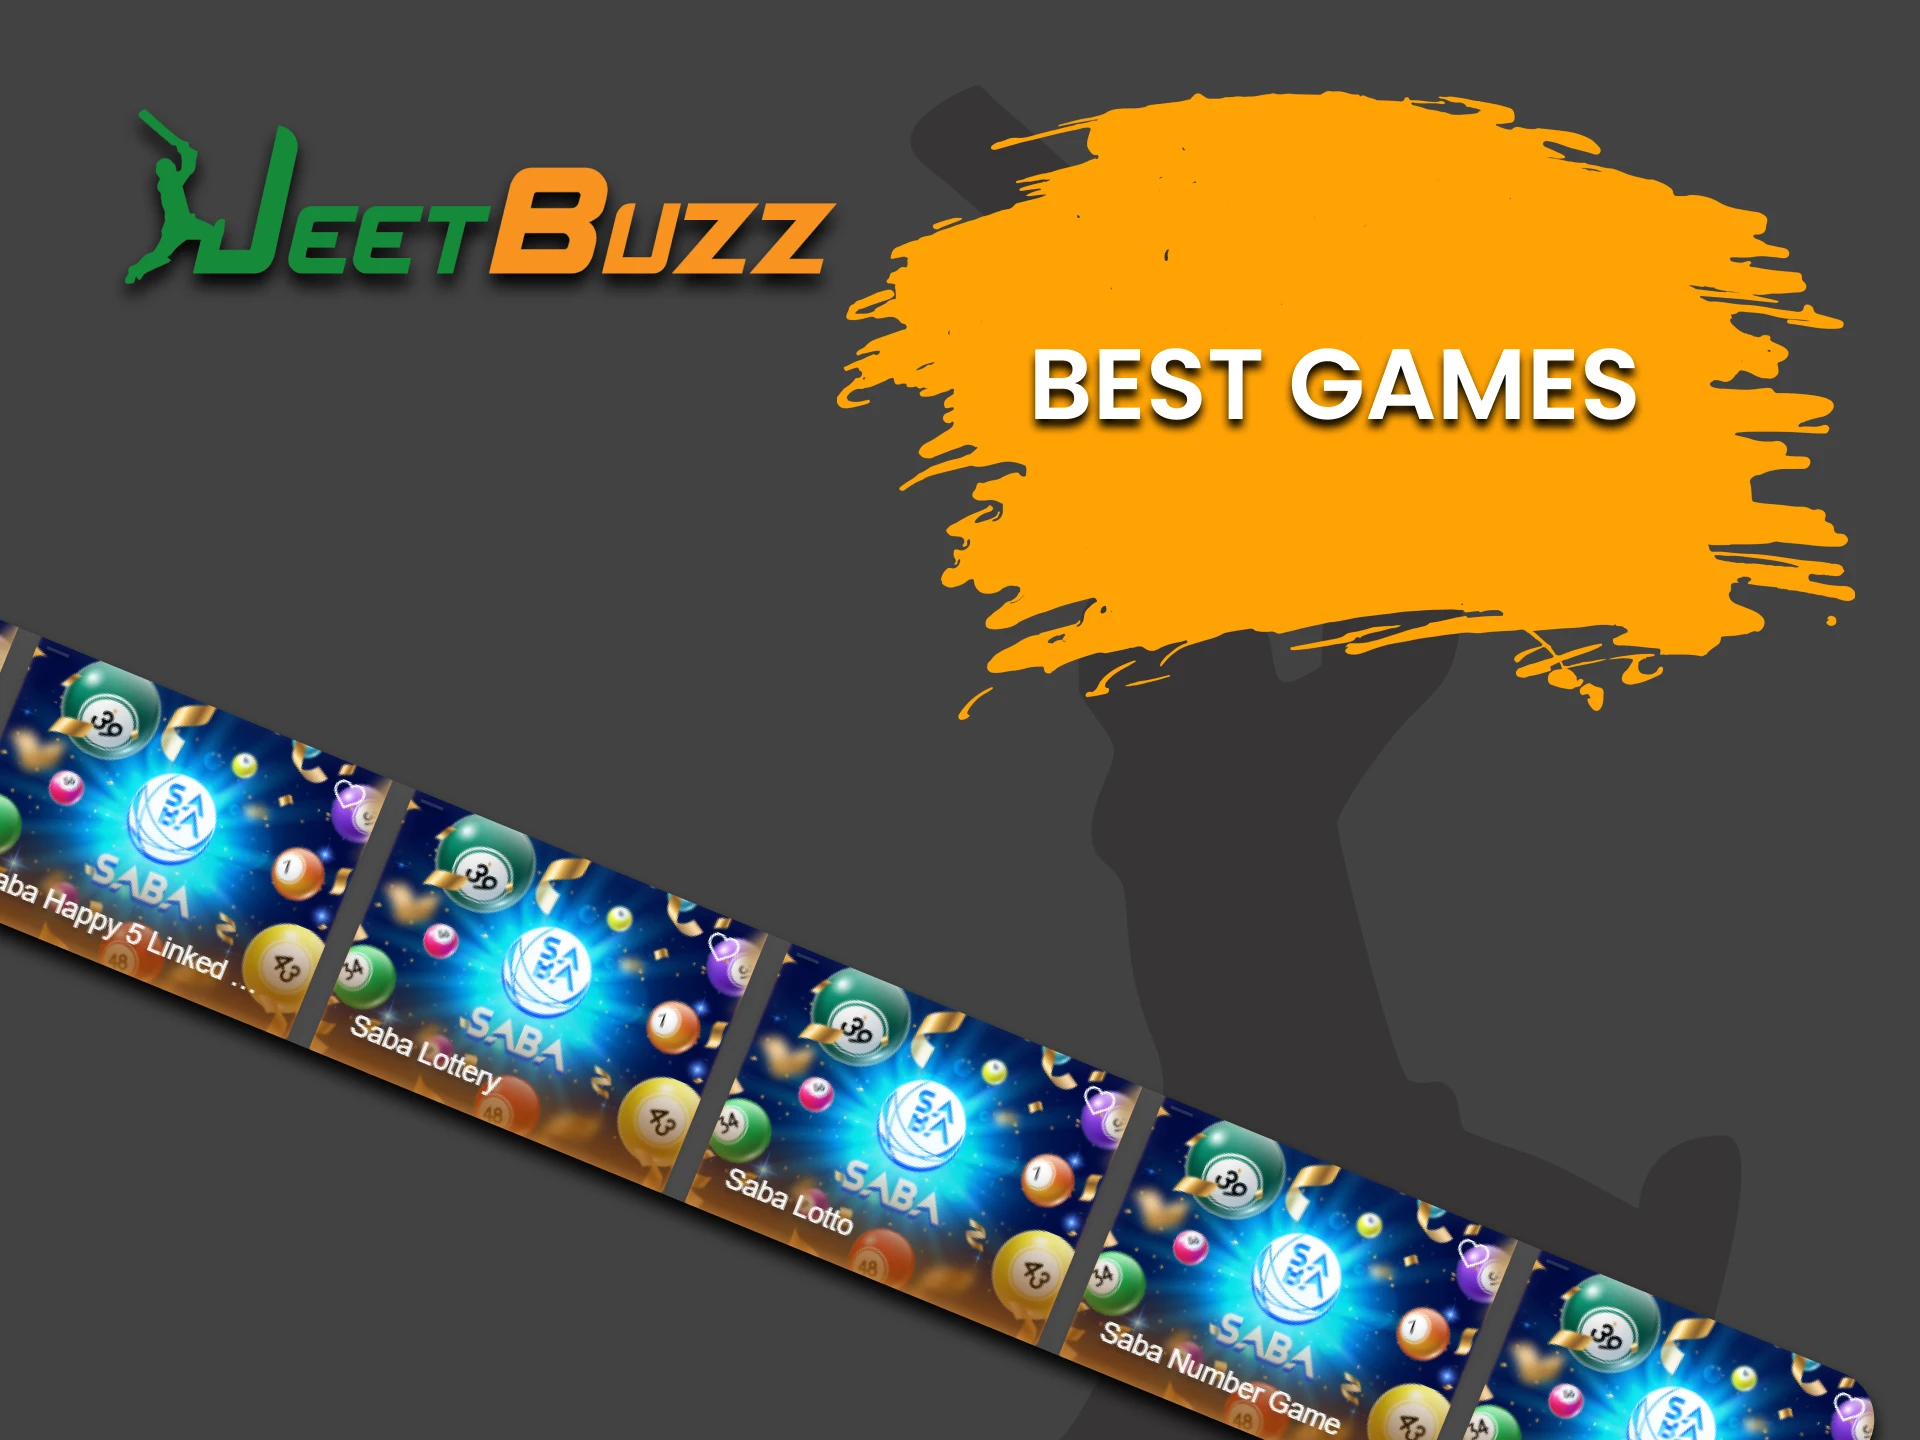 We share the best Lottery games on JeetBuzz.